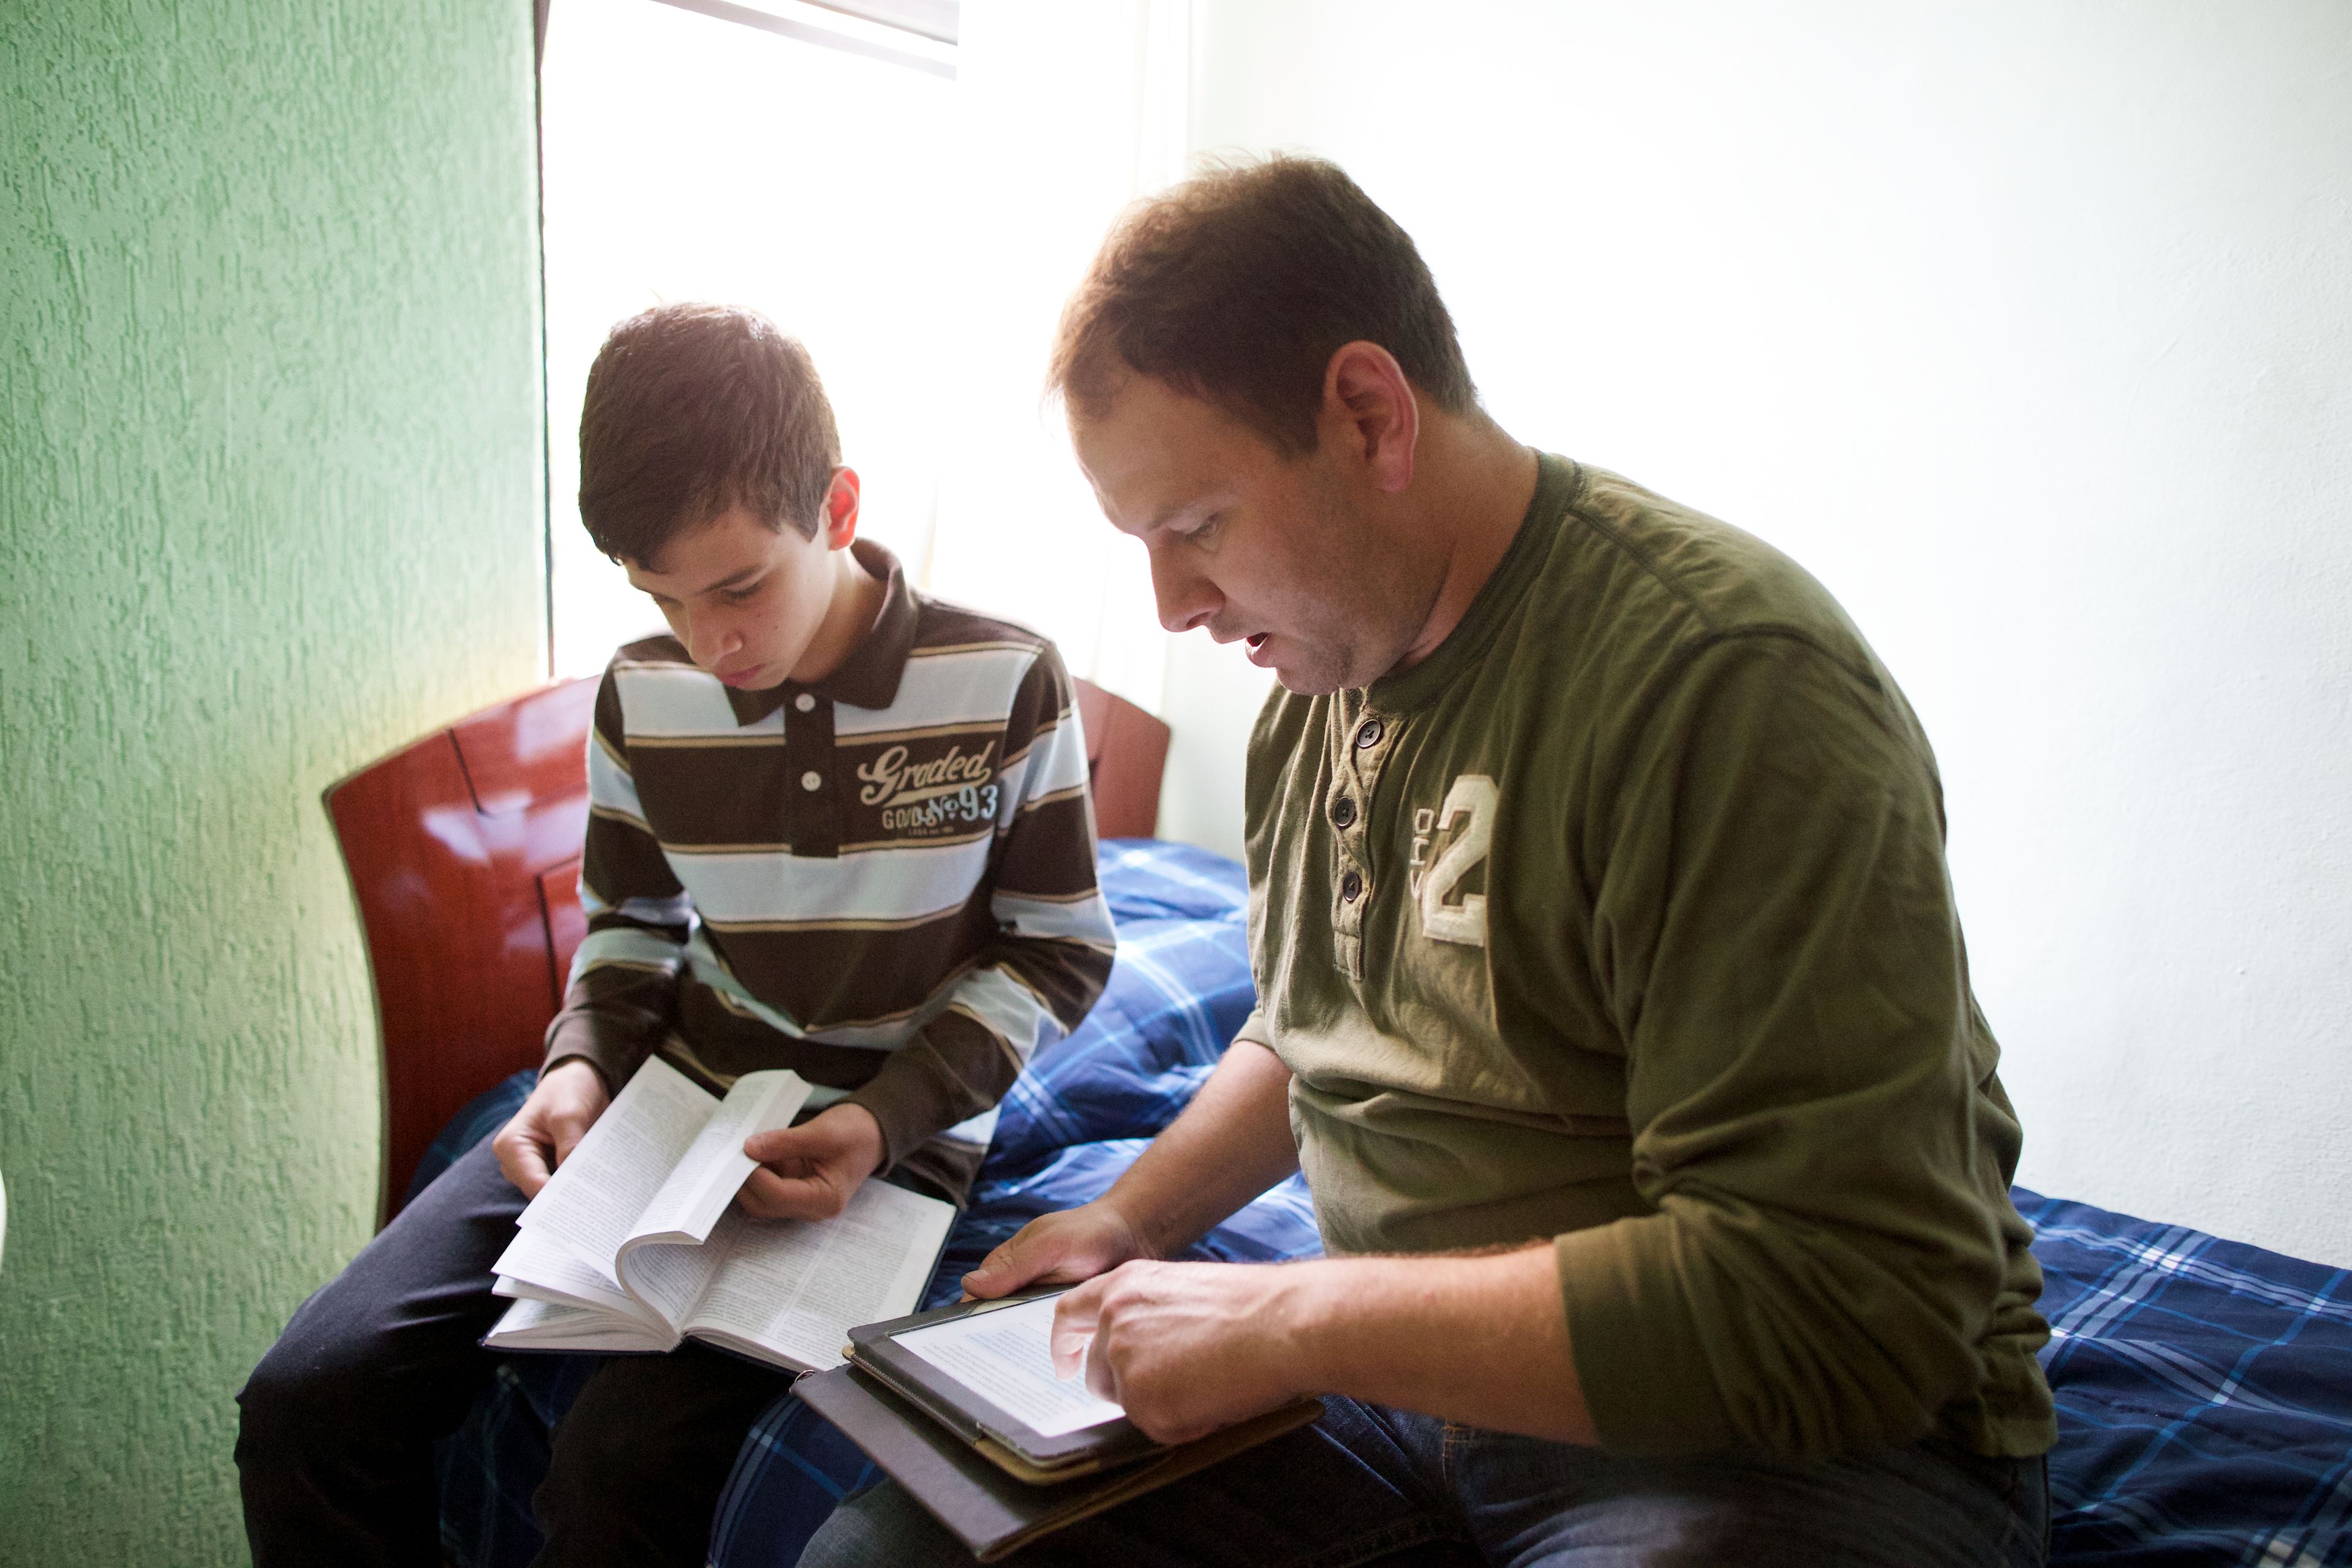 A father and his son sit together and read from the scriptures.